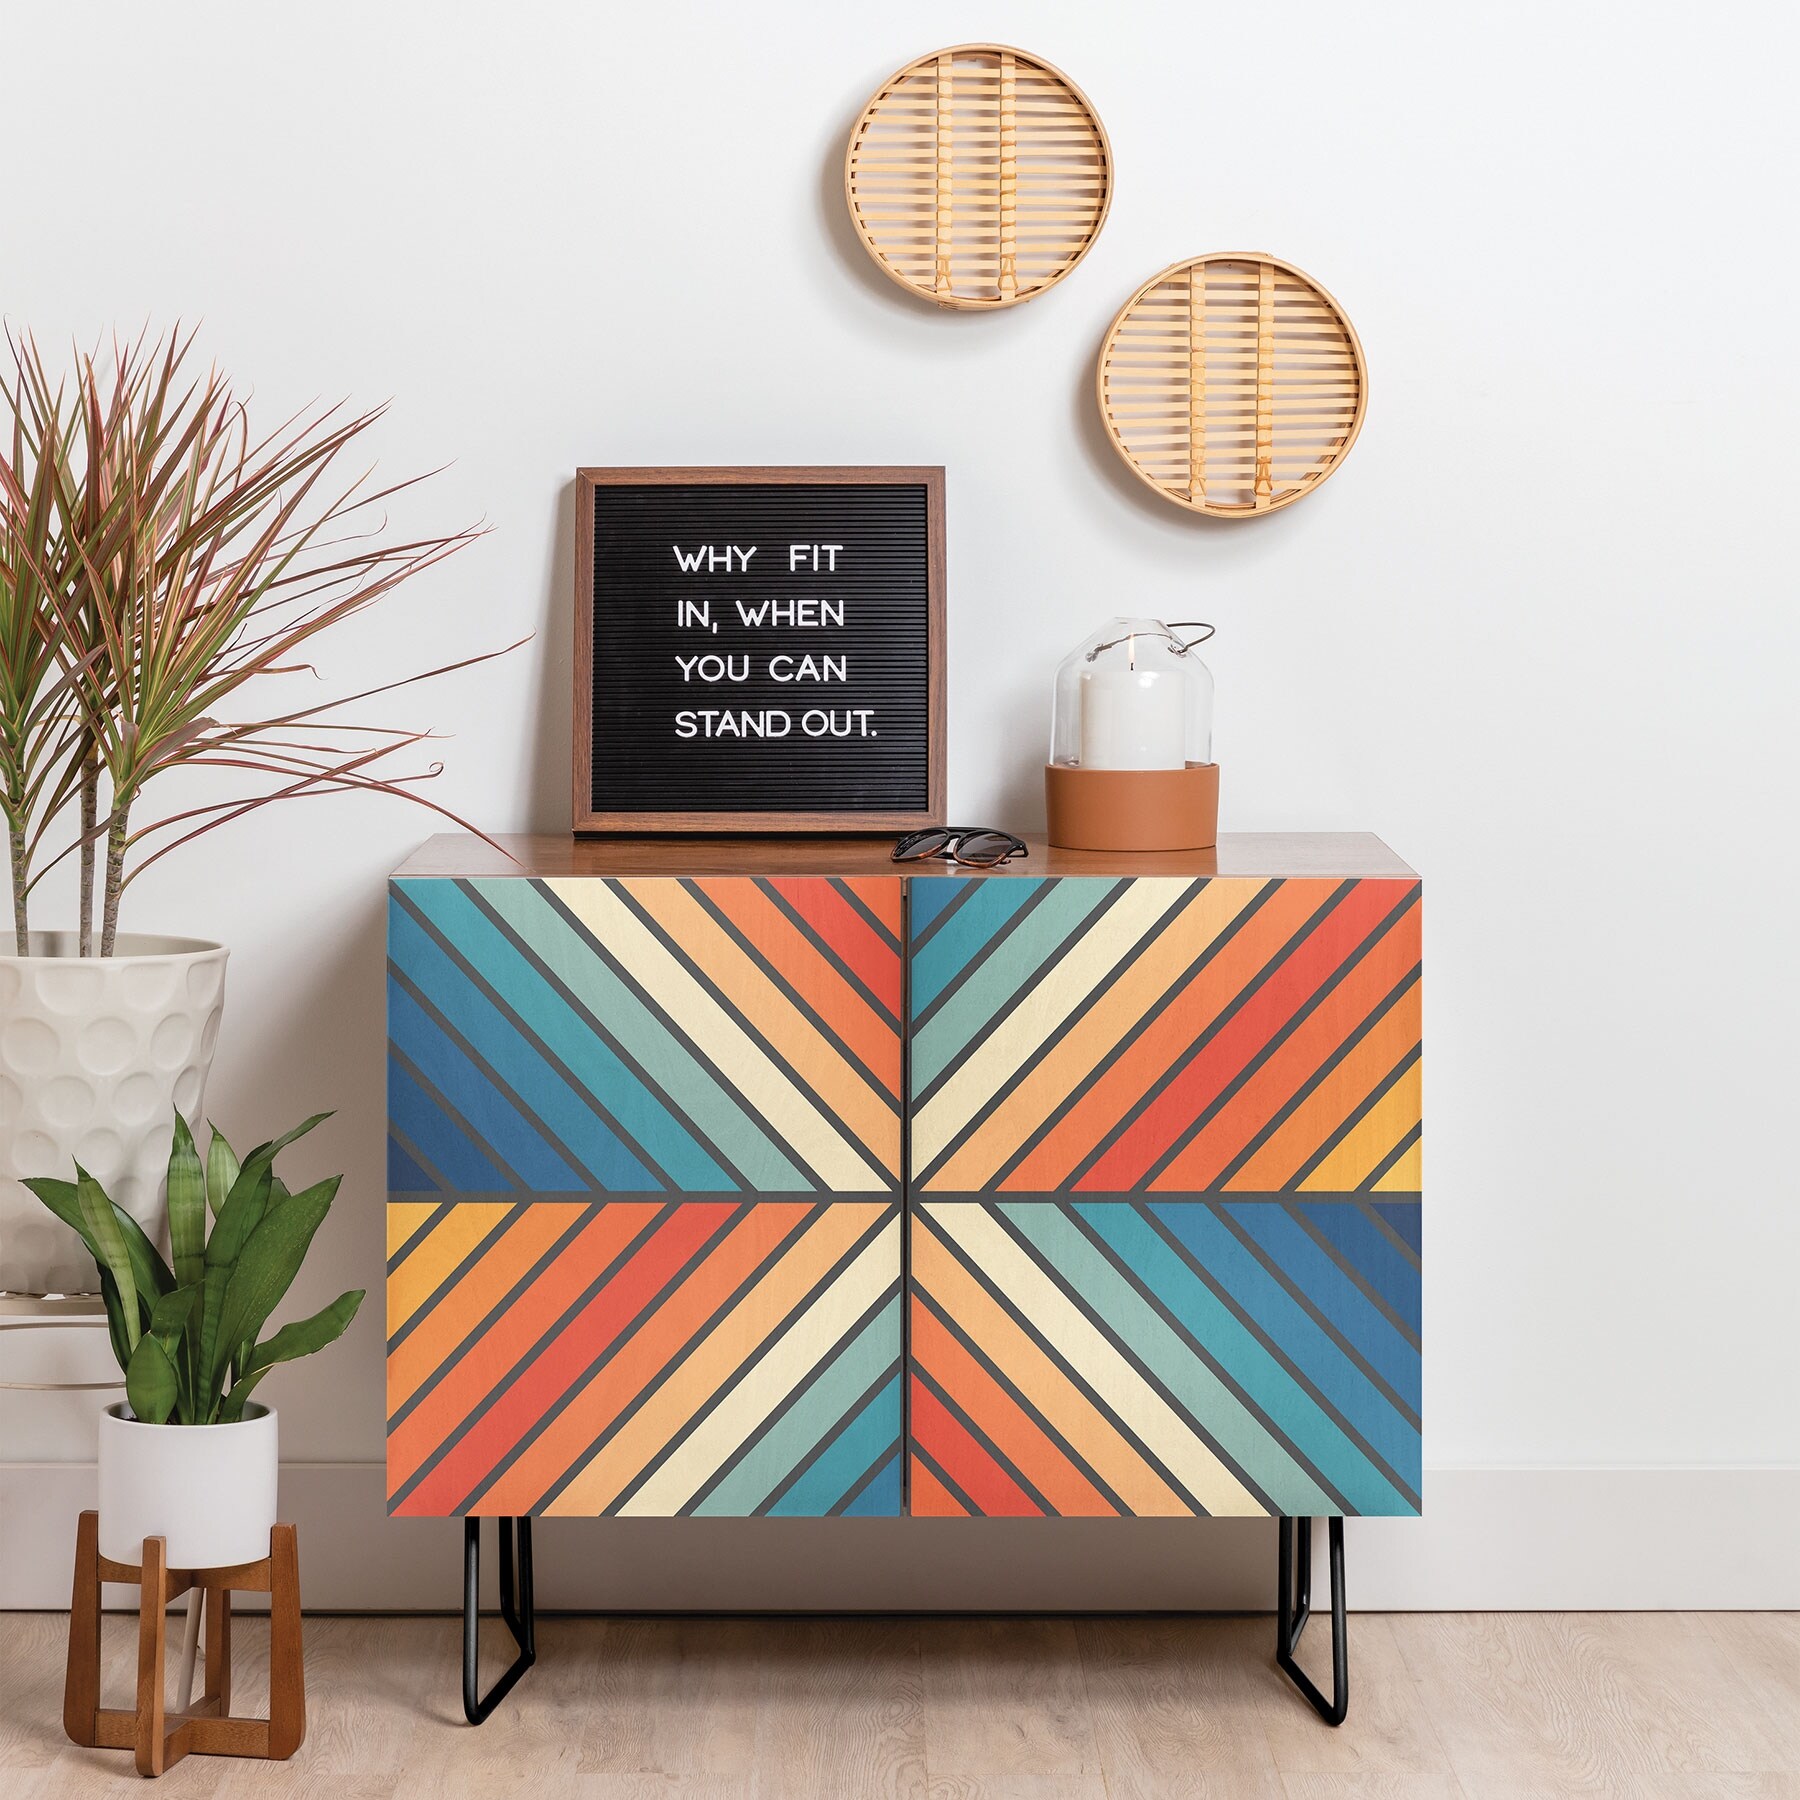 'Celebration Angle' Made-to-Order Credenza Cabinet